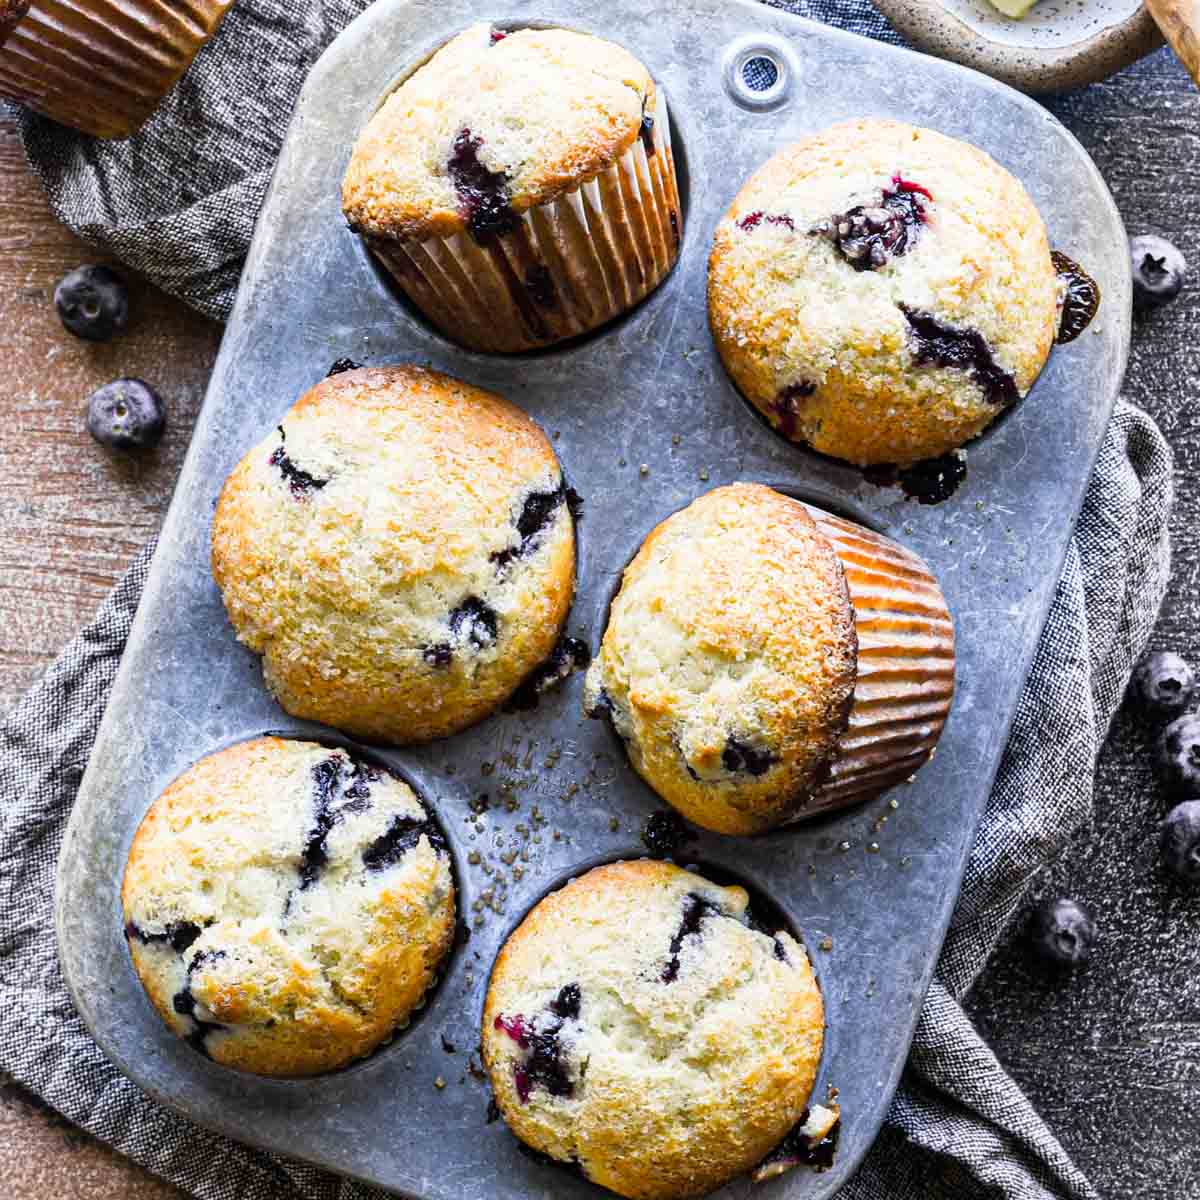 Fresh baked muffins in a muffin tin.